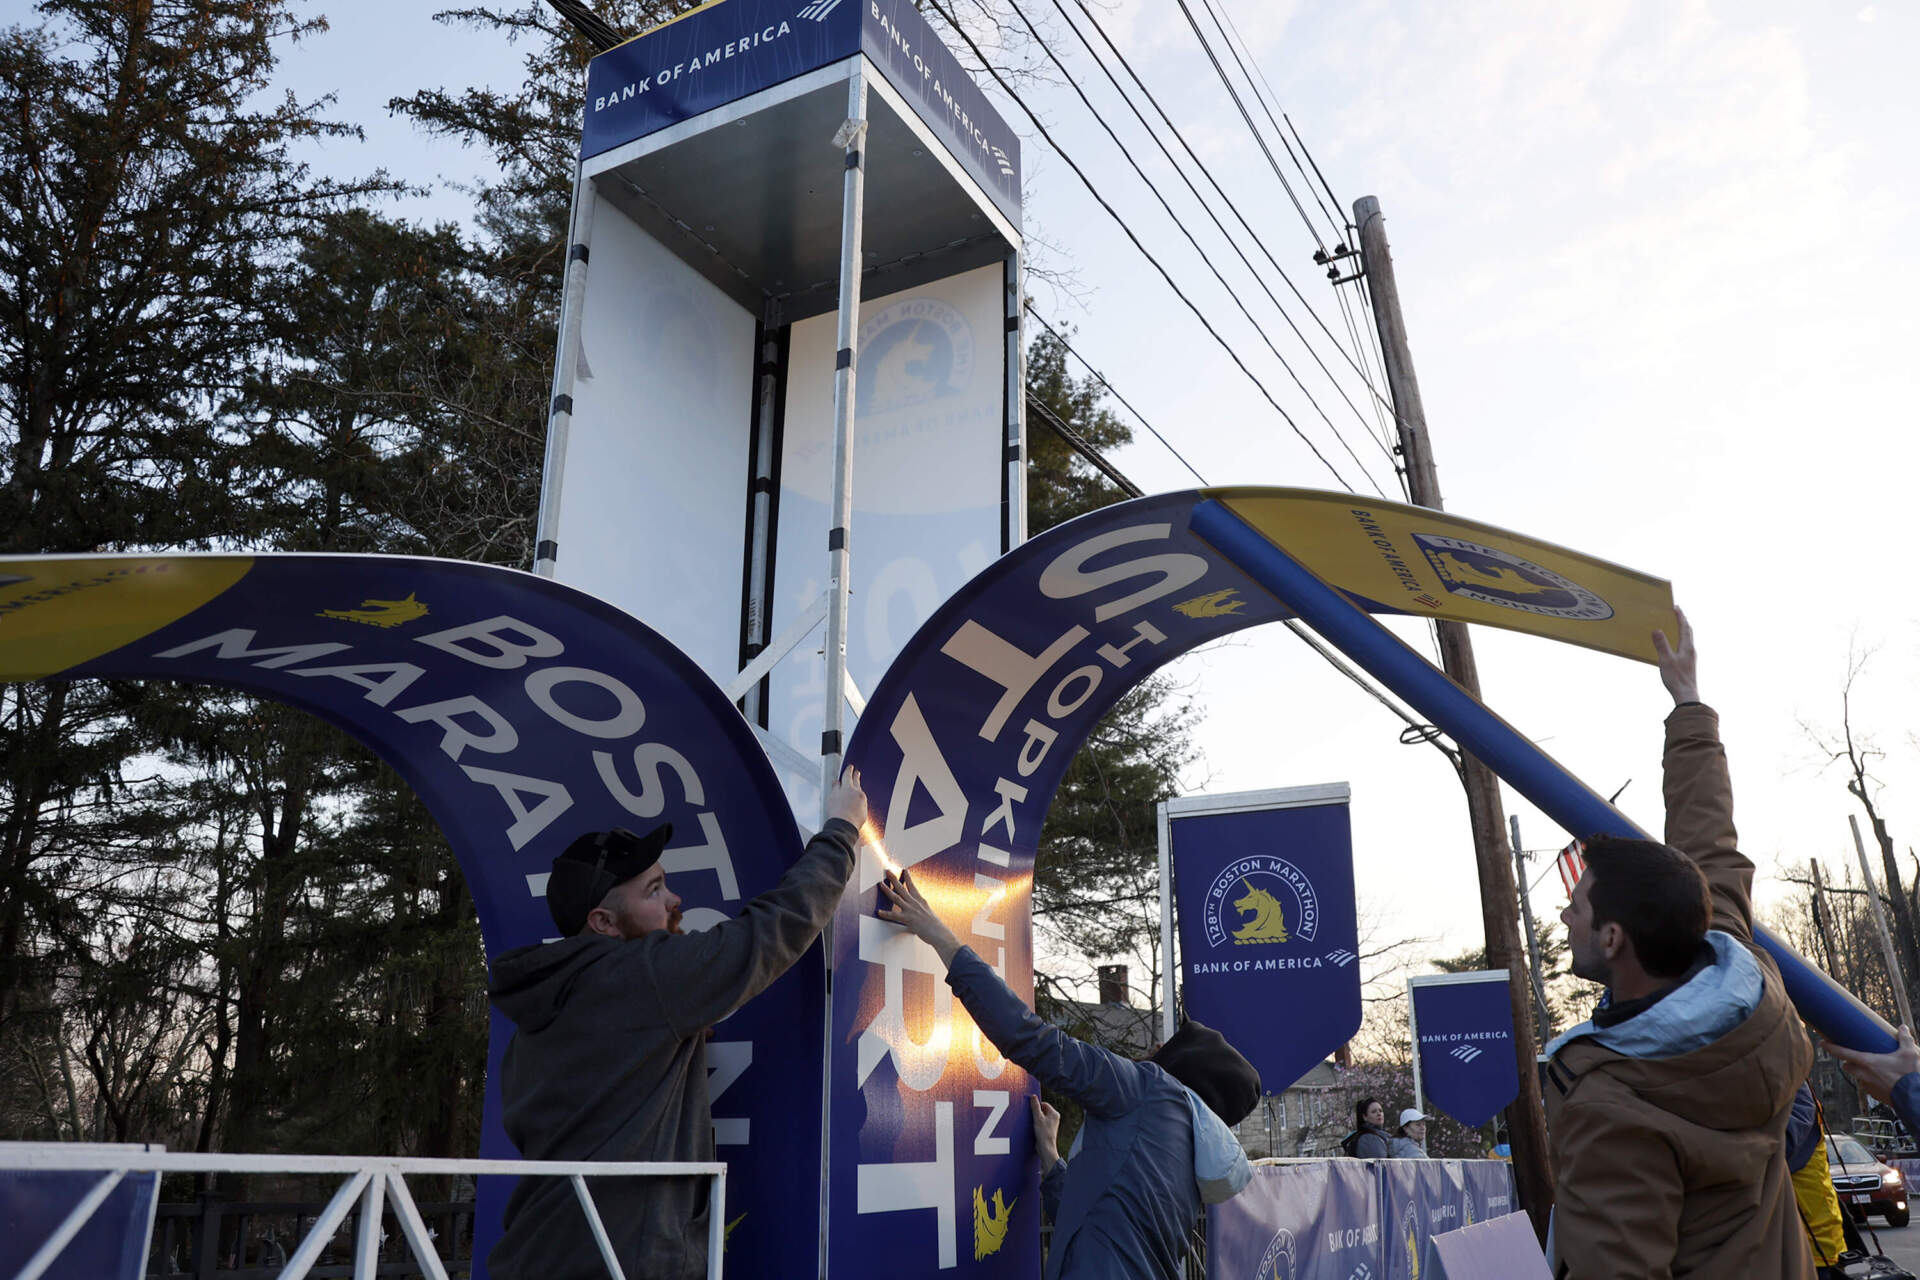 Workers affix banners at the starting line of the Boston Marathon on April 15, 2024, in Hopkinton, Mass. (Mary Schwalm/AP)